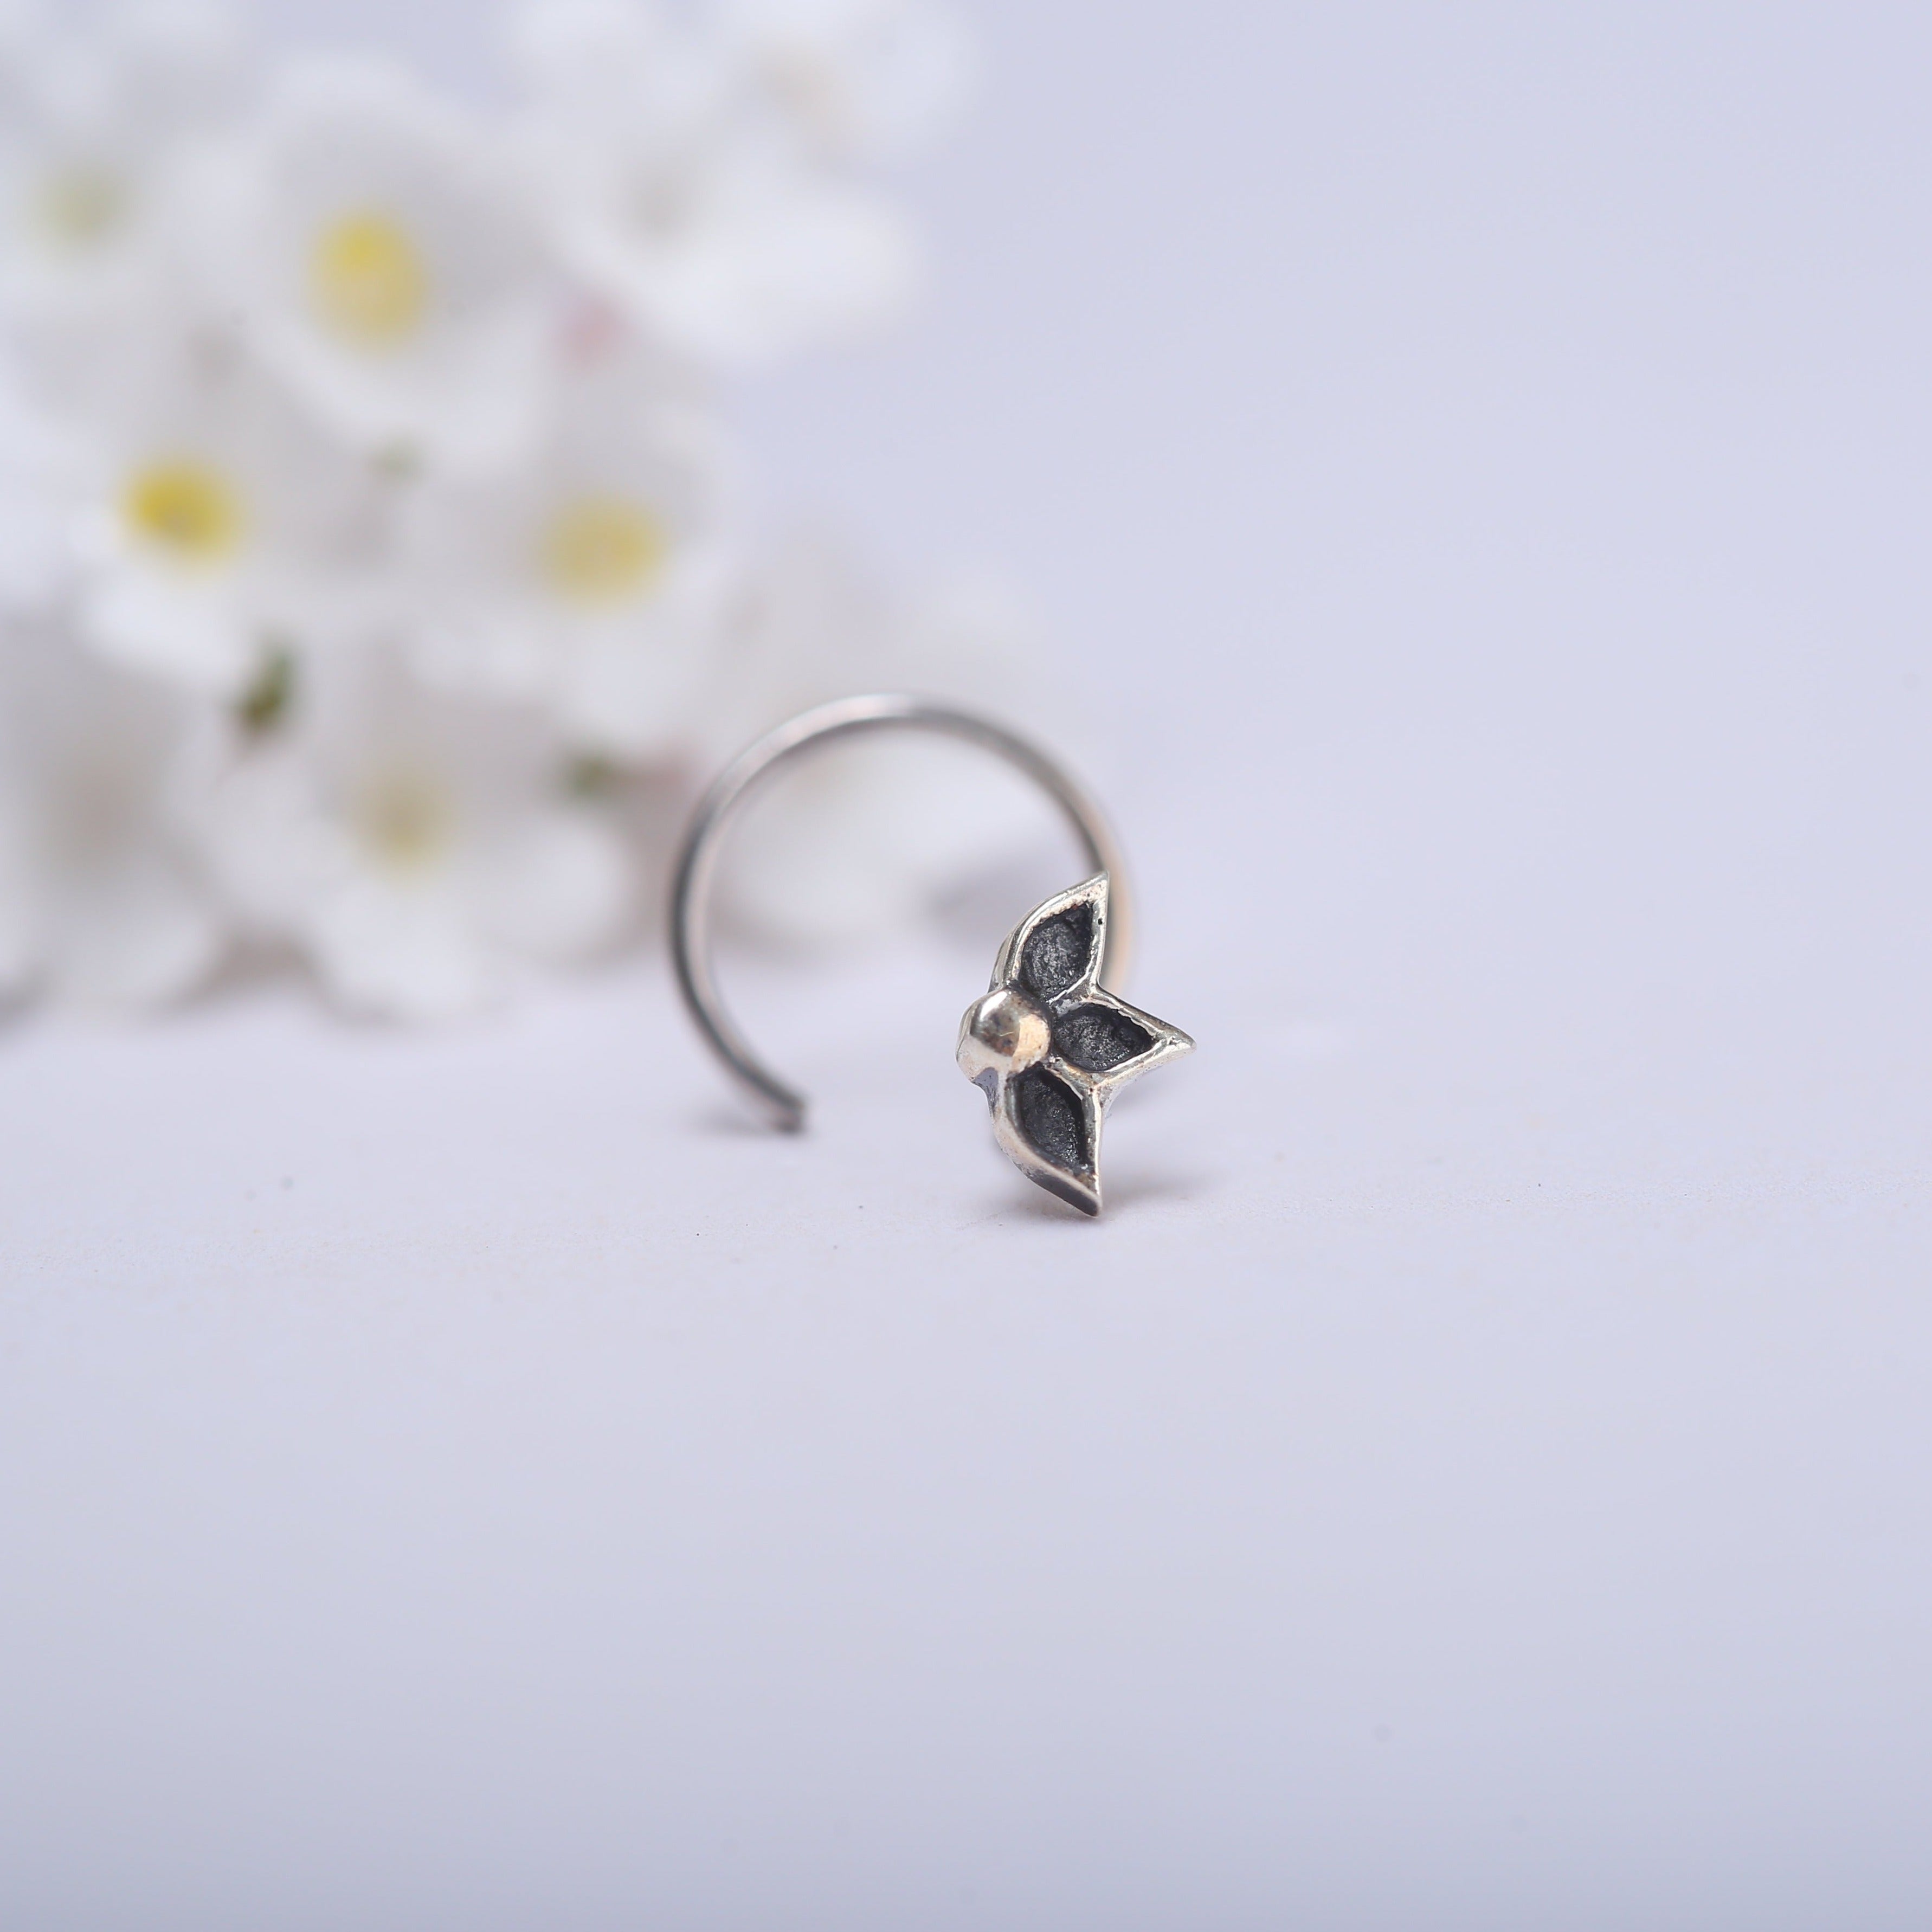 a close up of a ring with flowers in the background